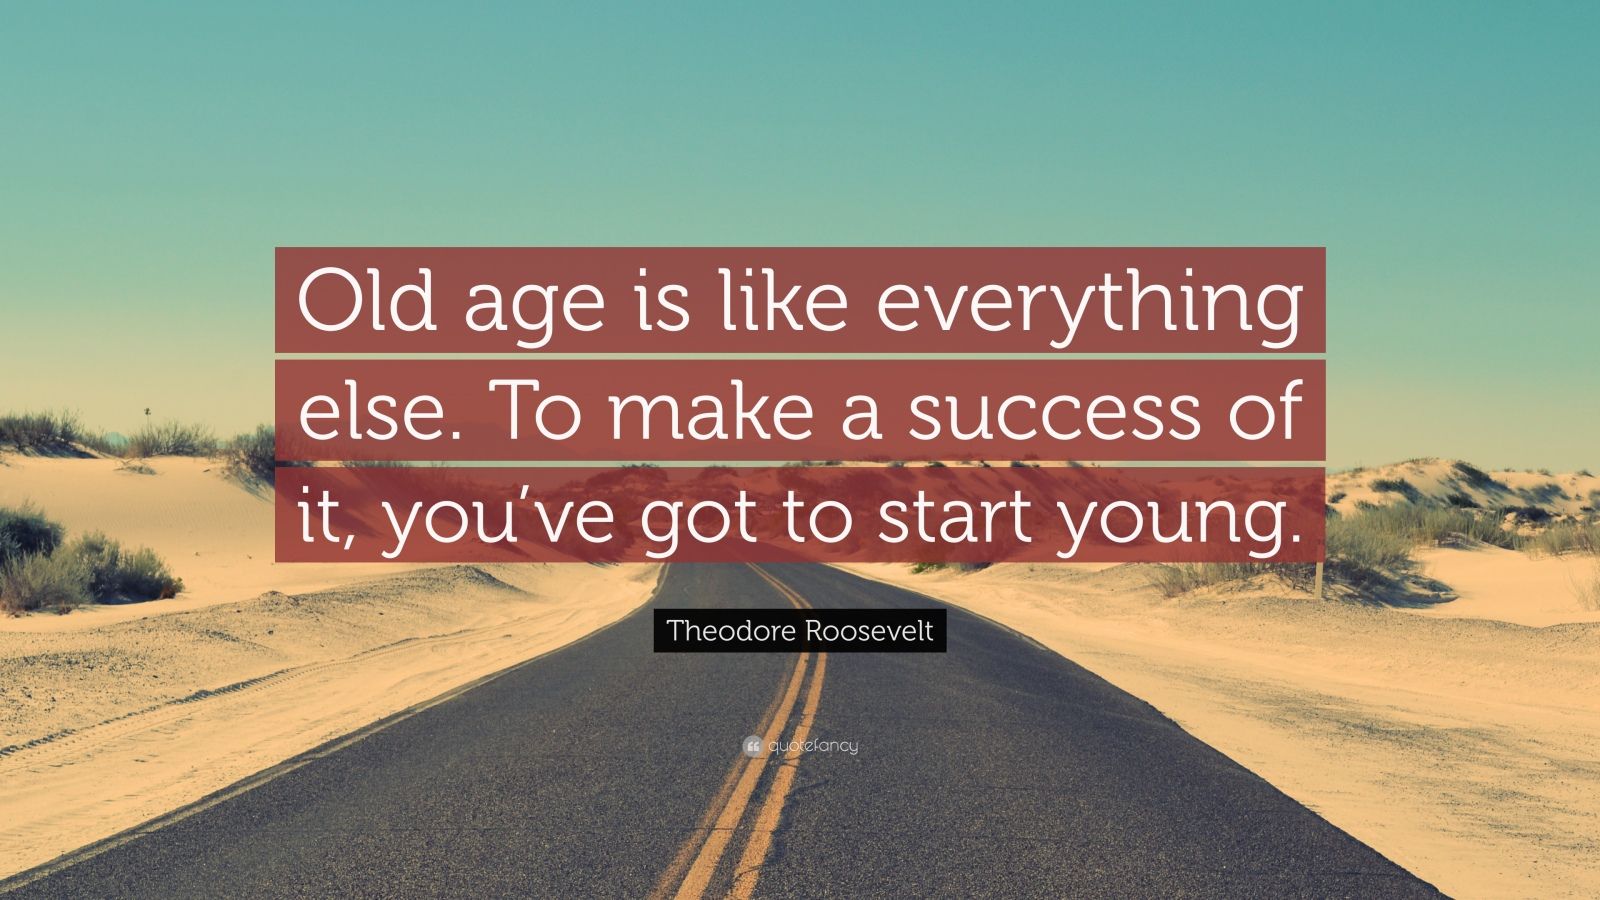 Theodore Roosevelt Quote “Old age is like everything else